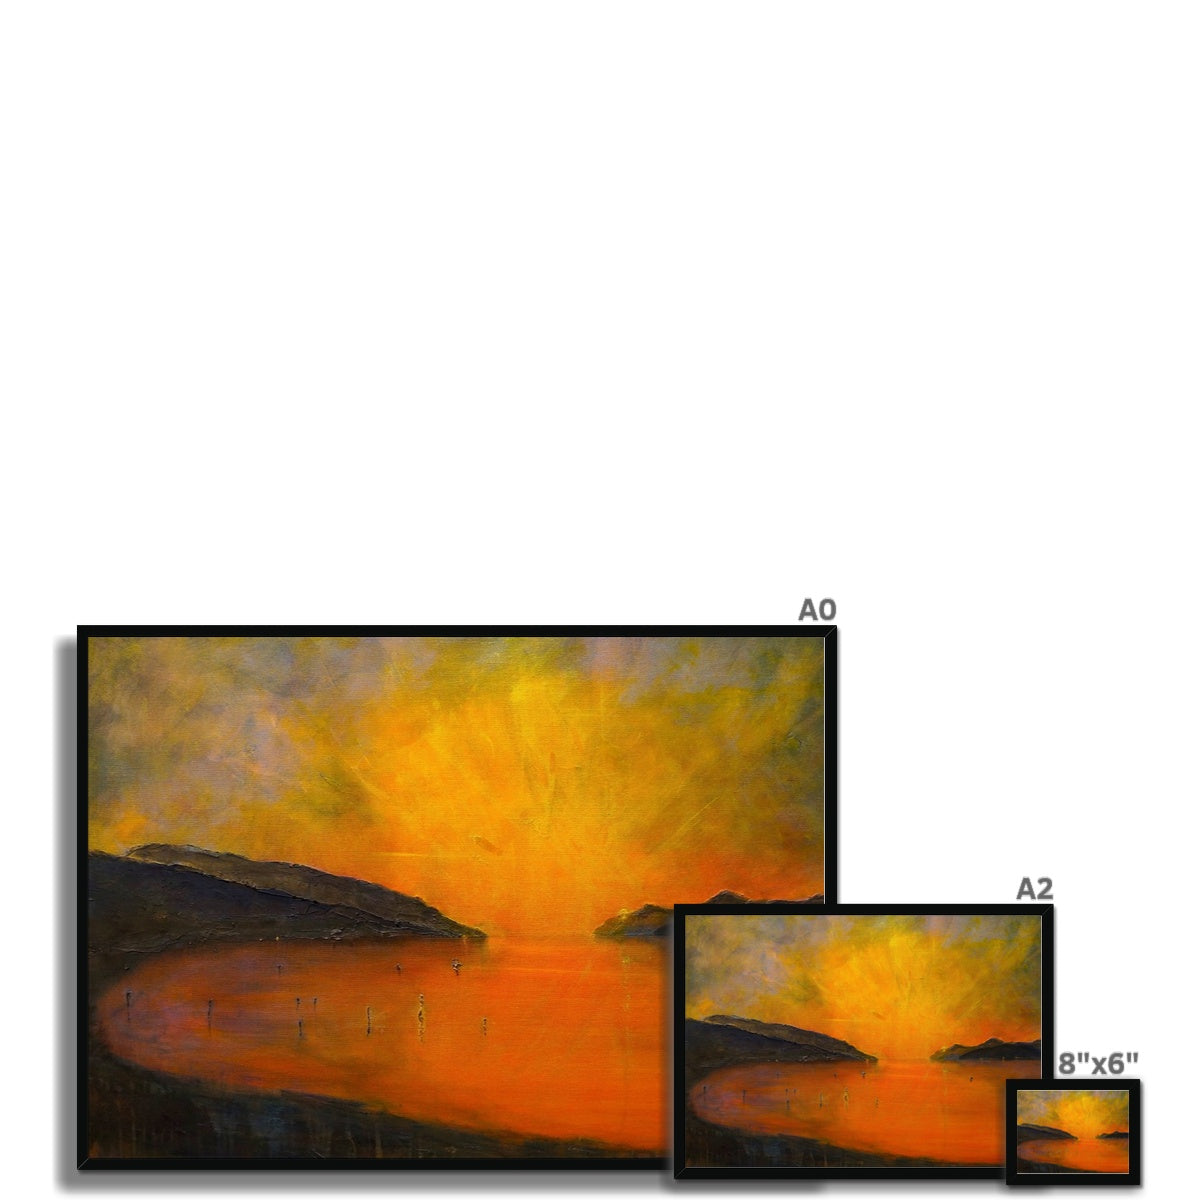 Loch Ness Sunset Painting | Framed Prints From Scotland-Framed Prints-Scottish Lochs & Mountains Art Gallery-Paintings, Prints, Homeware, Art Gifts From Scotland By Scottish Artist Kevin Hunter